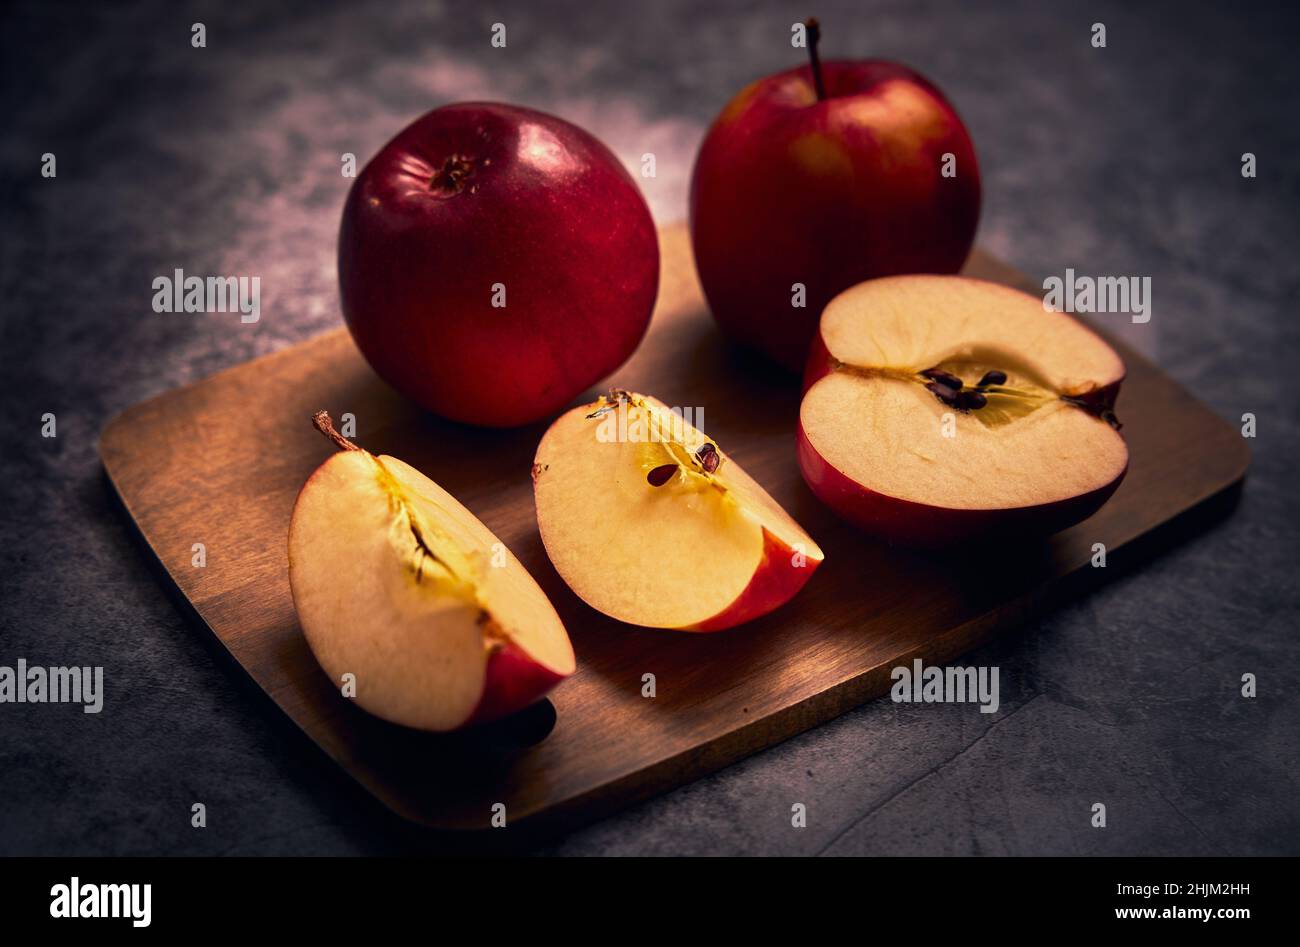 Apples board. Apples are on a cutting board and one apple is cut into a several pieces and the whole composition on a dark background Stock Photo